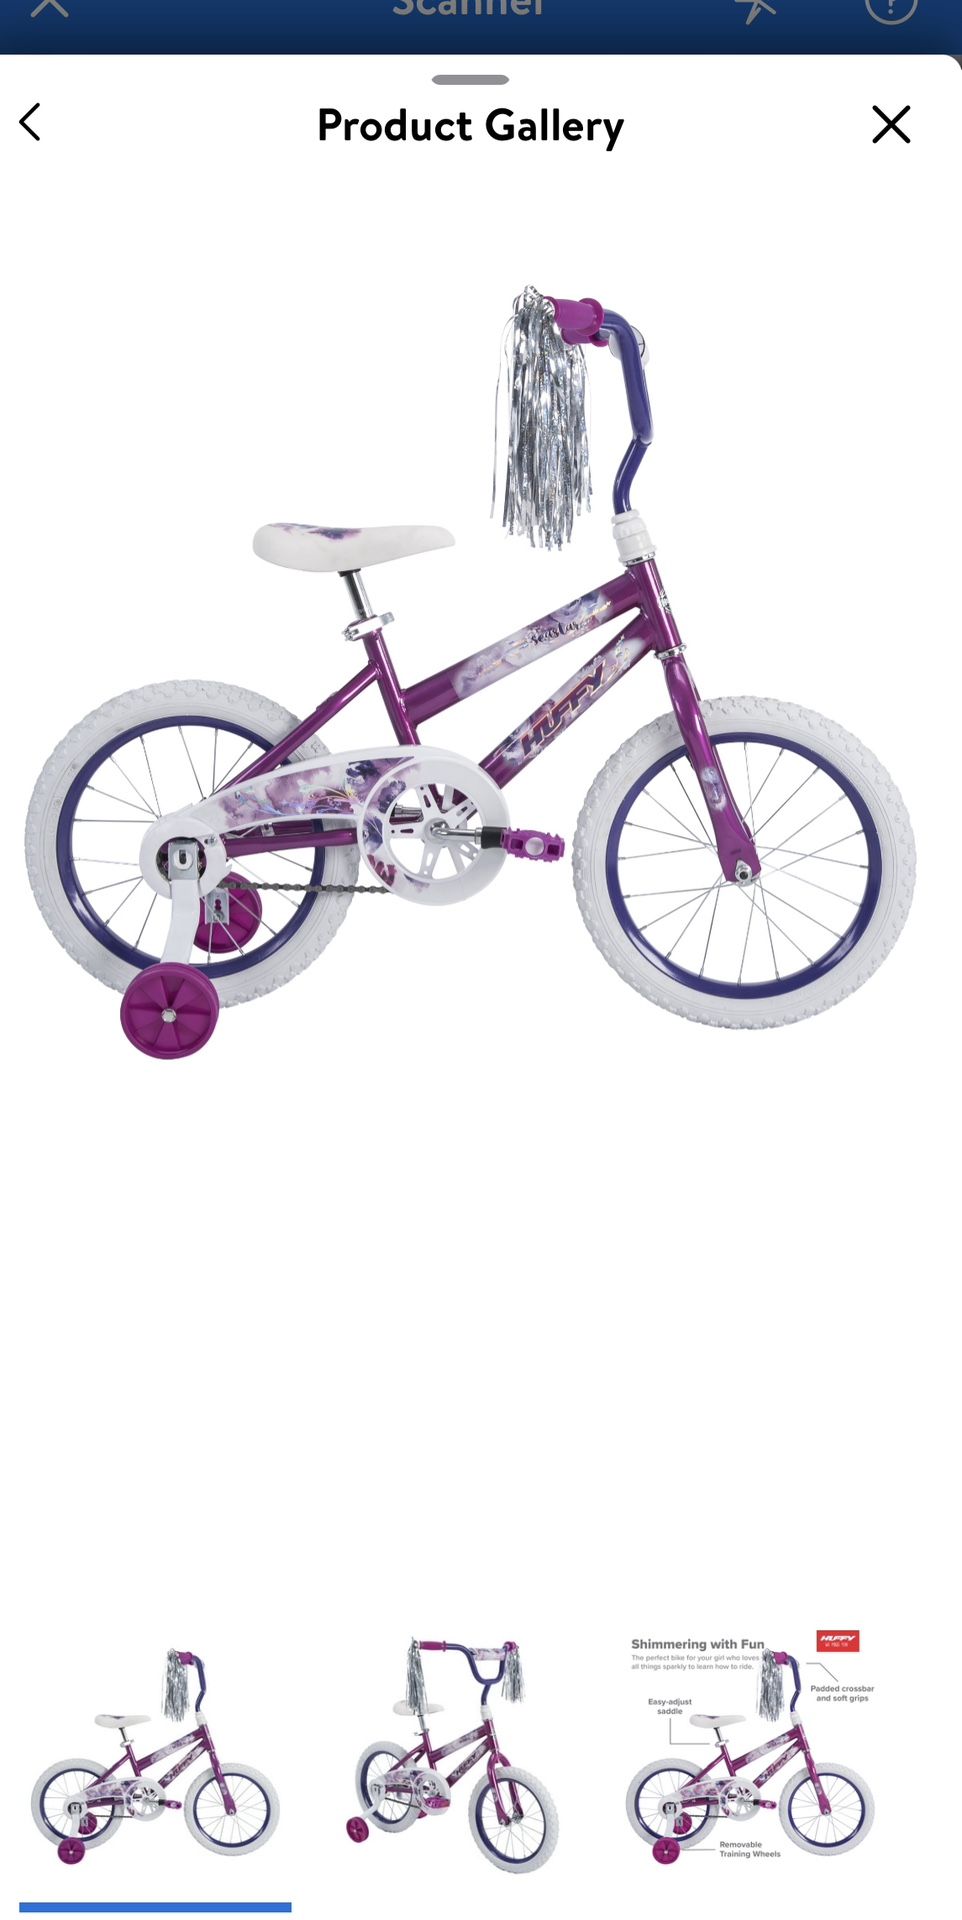 Huffy 16 in. Sea Star Kids Bike for Girls Ages 4 and up, Child, Metallic Purple